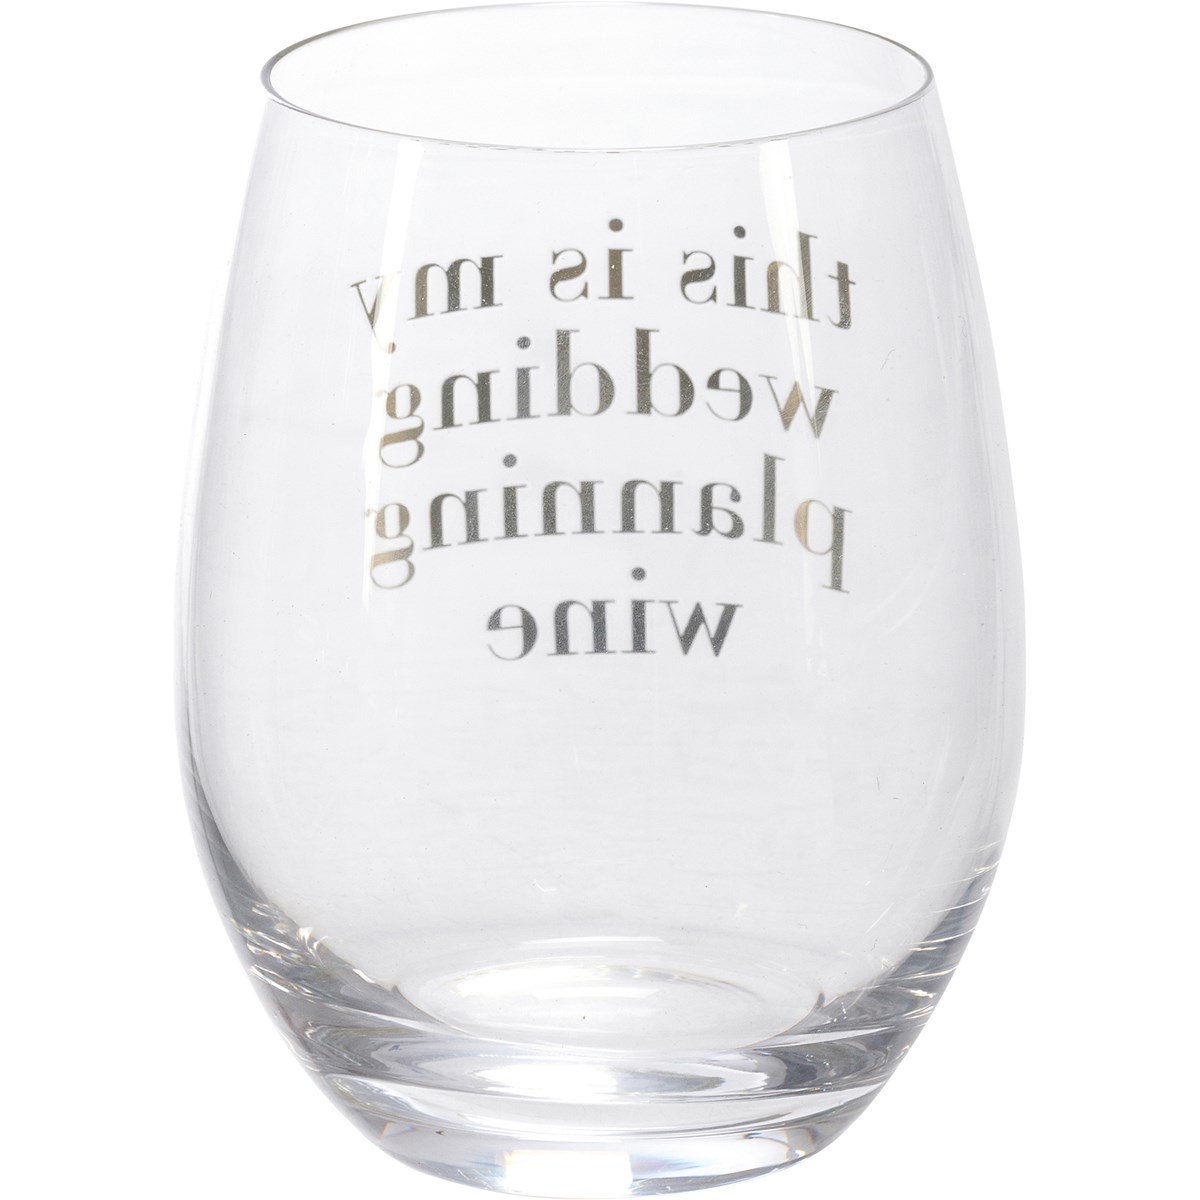 This Is My Wedding Planning Wine Wine Glass - Glass